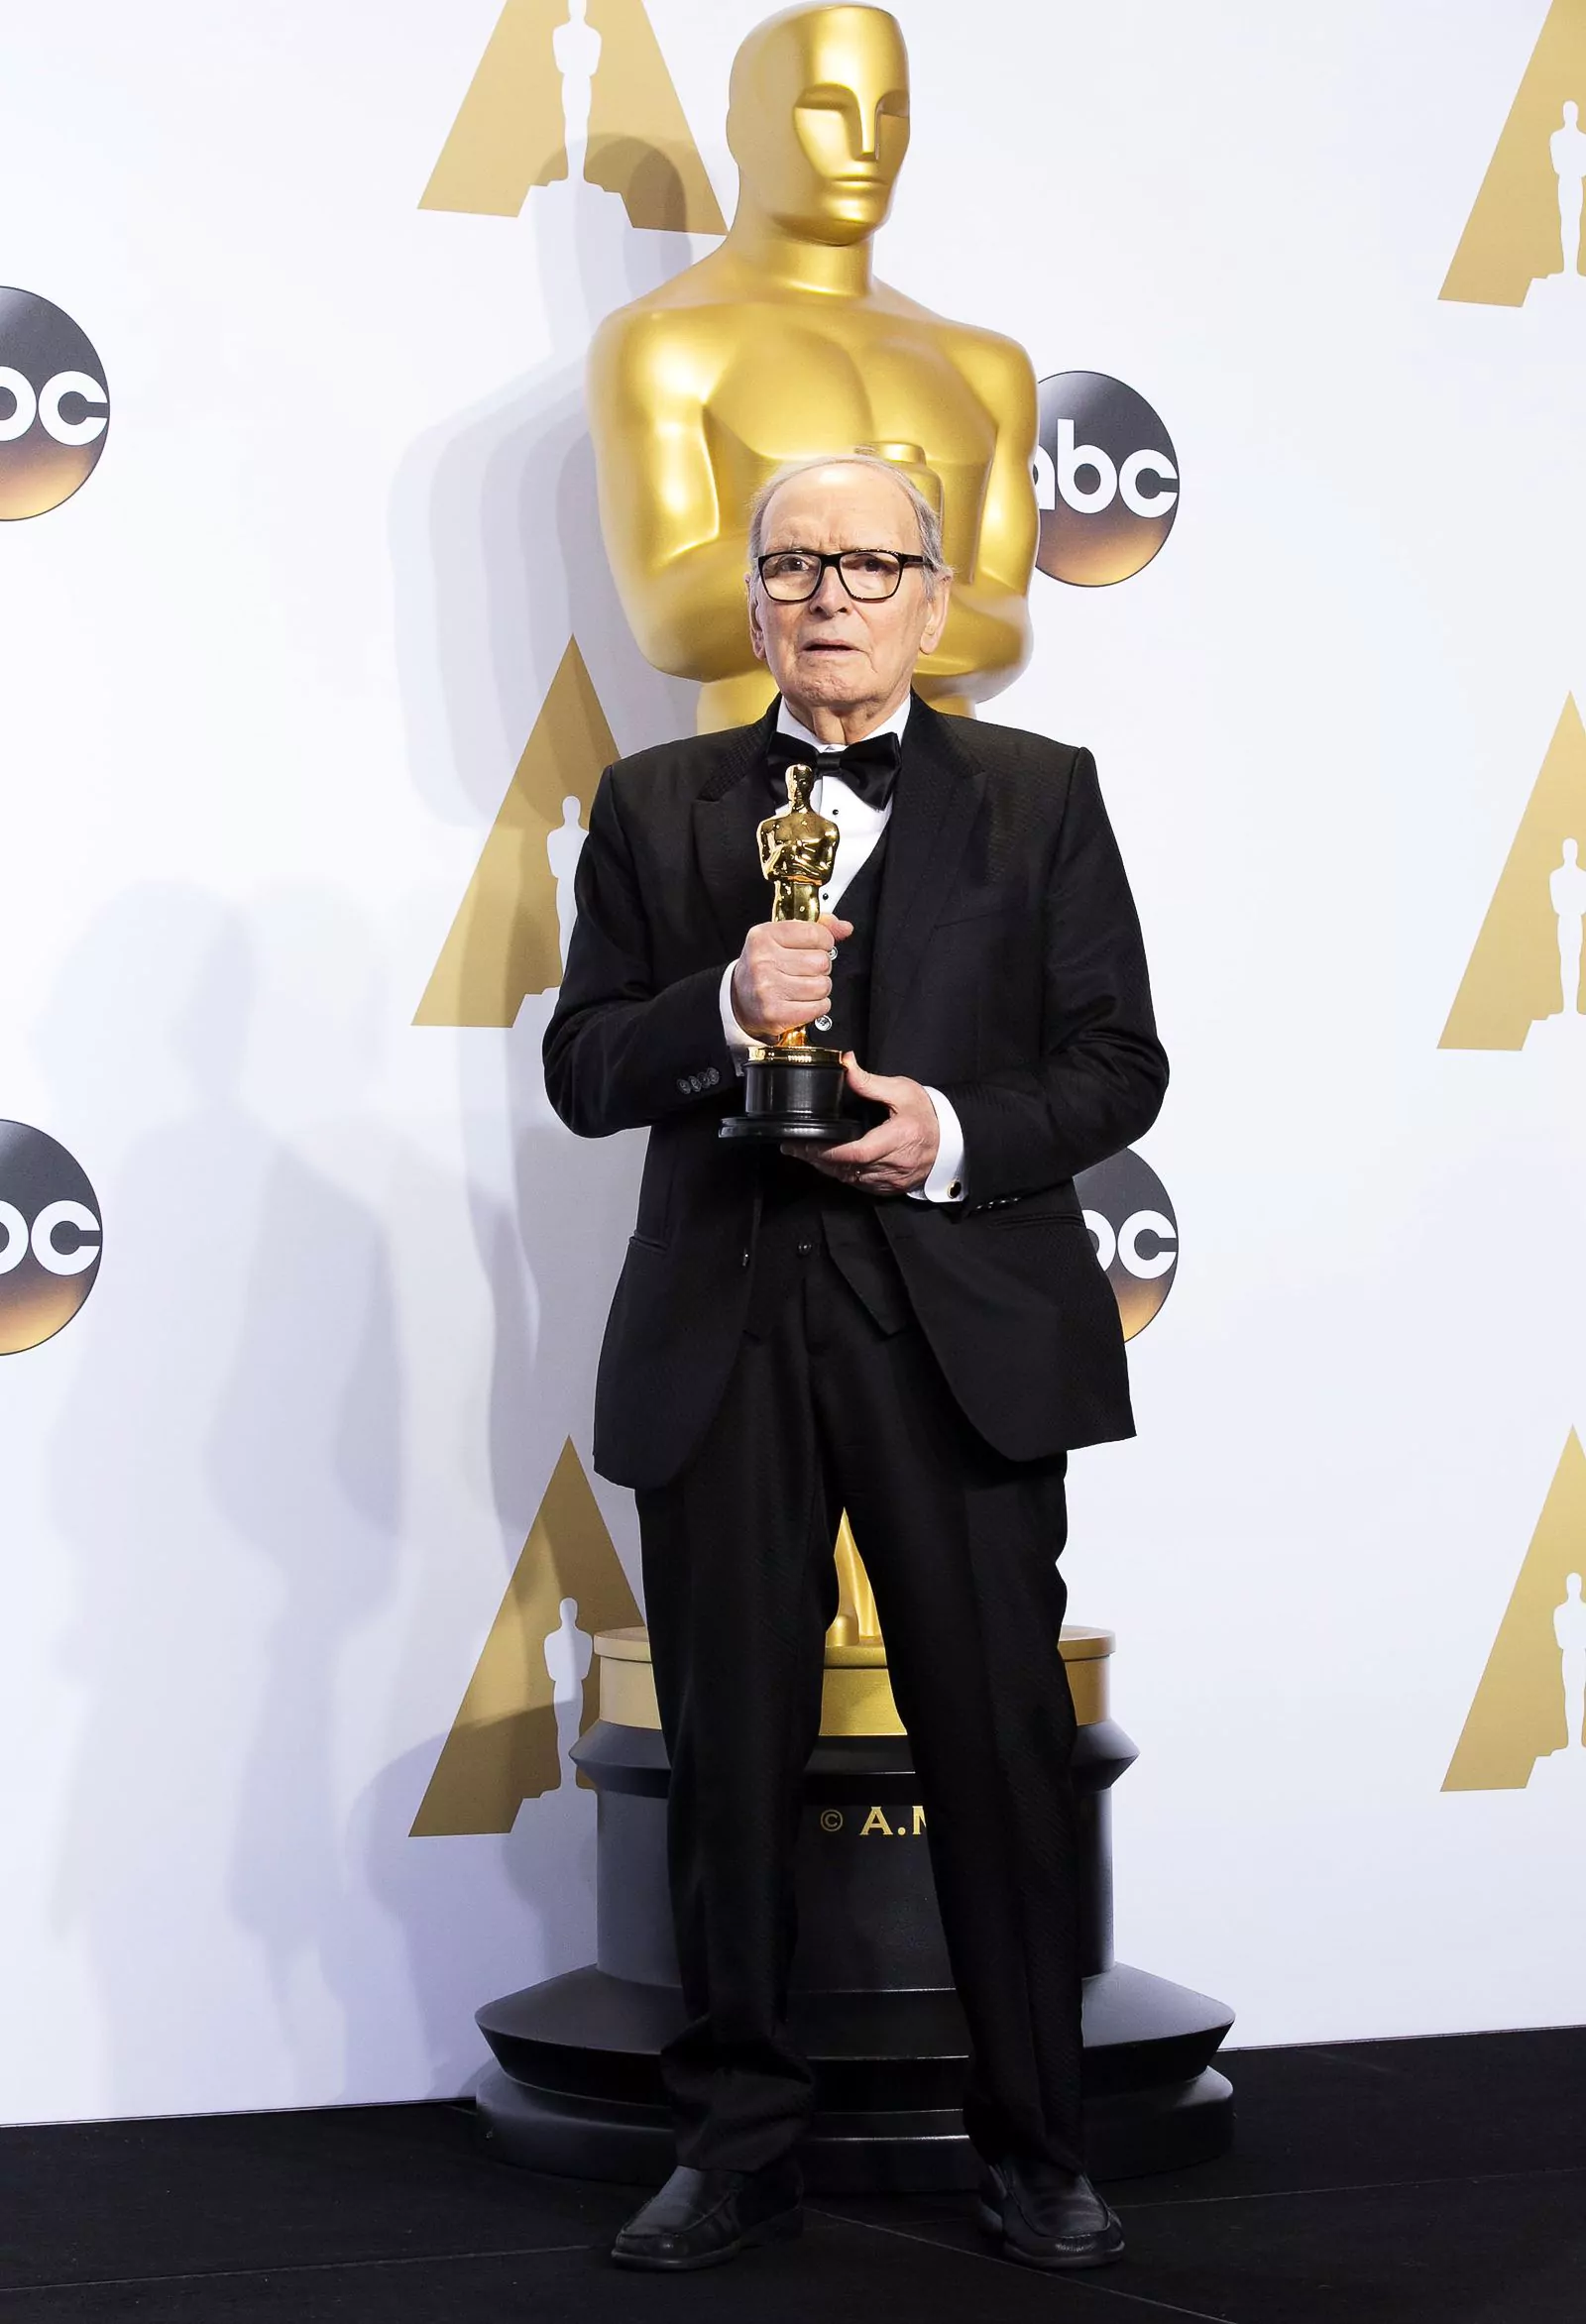 Ennio Morricone at the 88th Annual Academy Awards, February 28, 2016